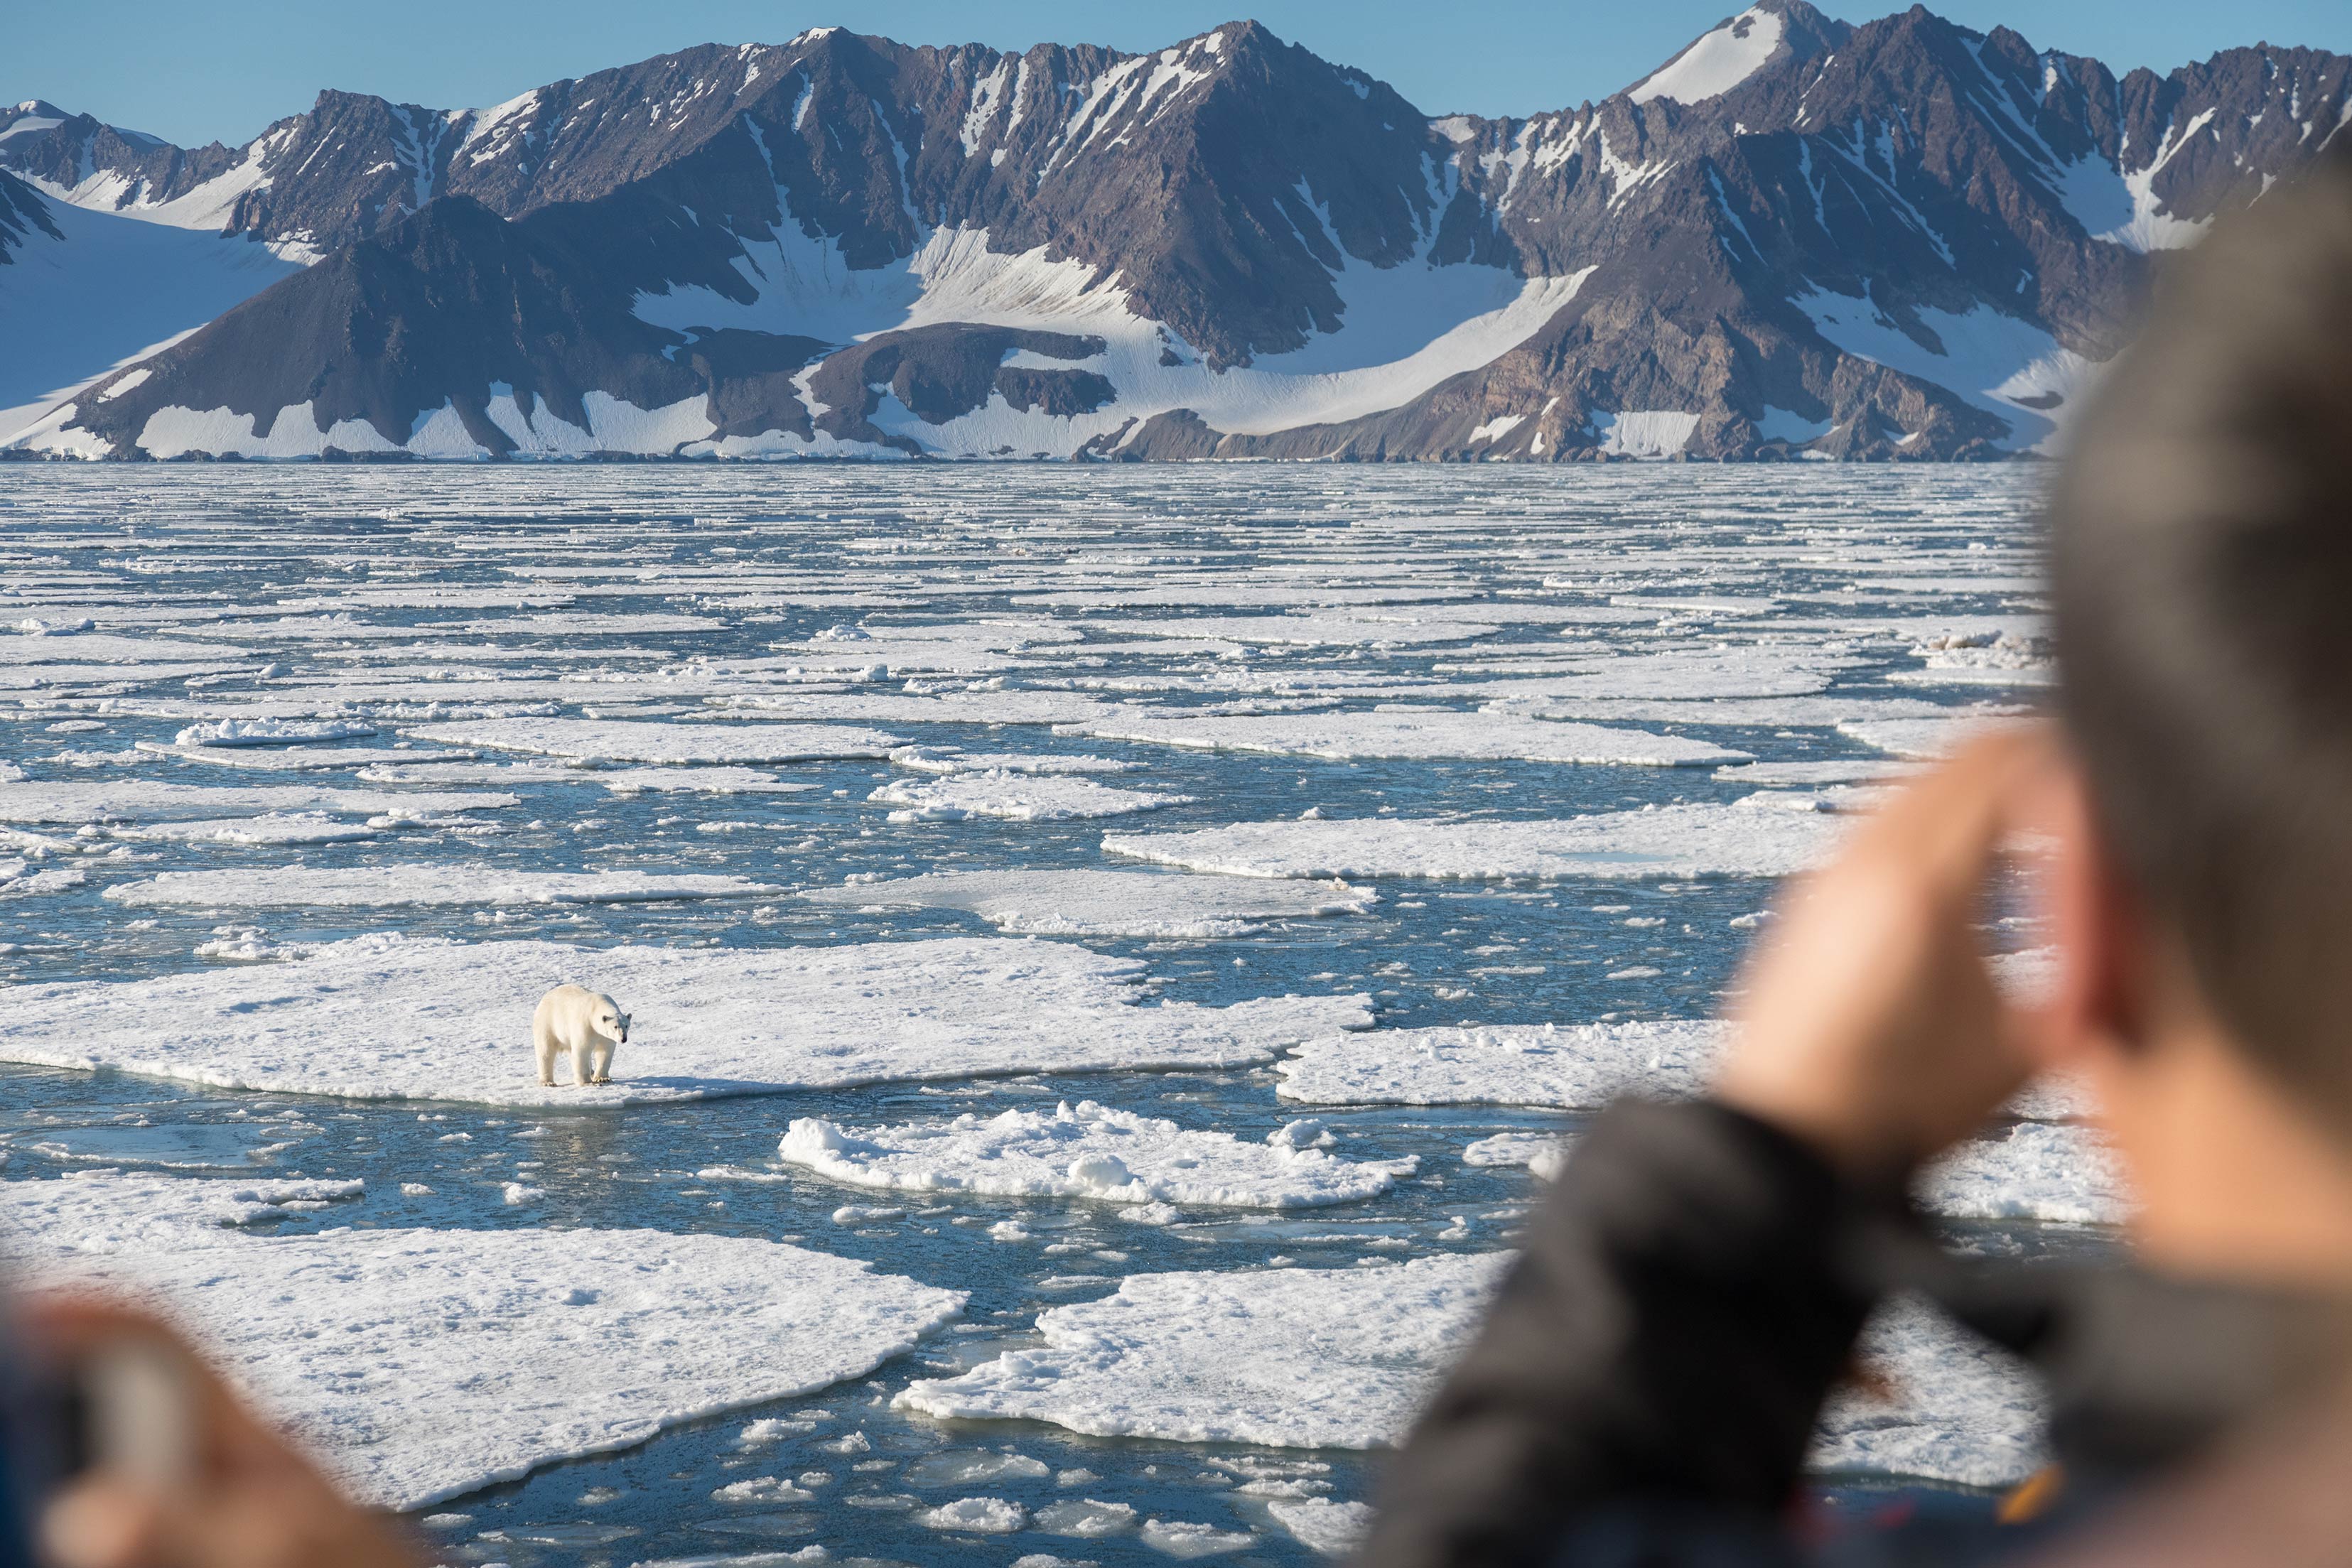 Quark Expeditions guests in East Greenland photograph a polar bear as it hunts for food along the ice edge.